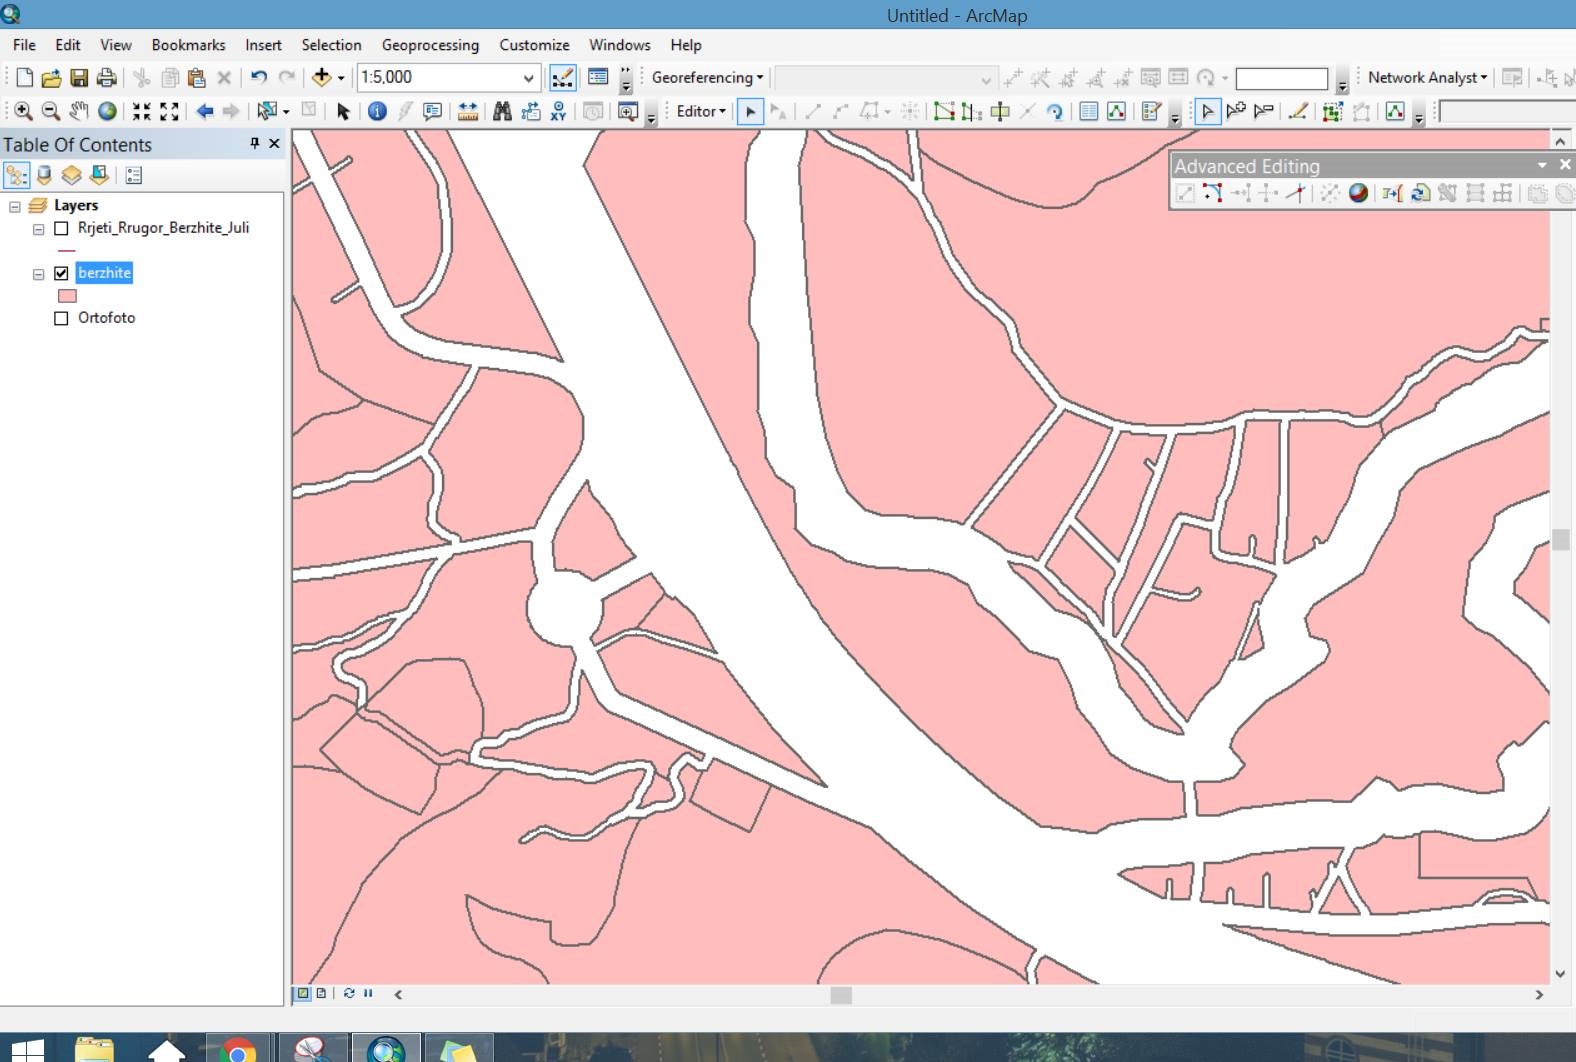 Polygons in ArcGIS